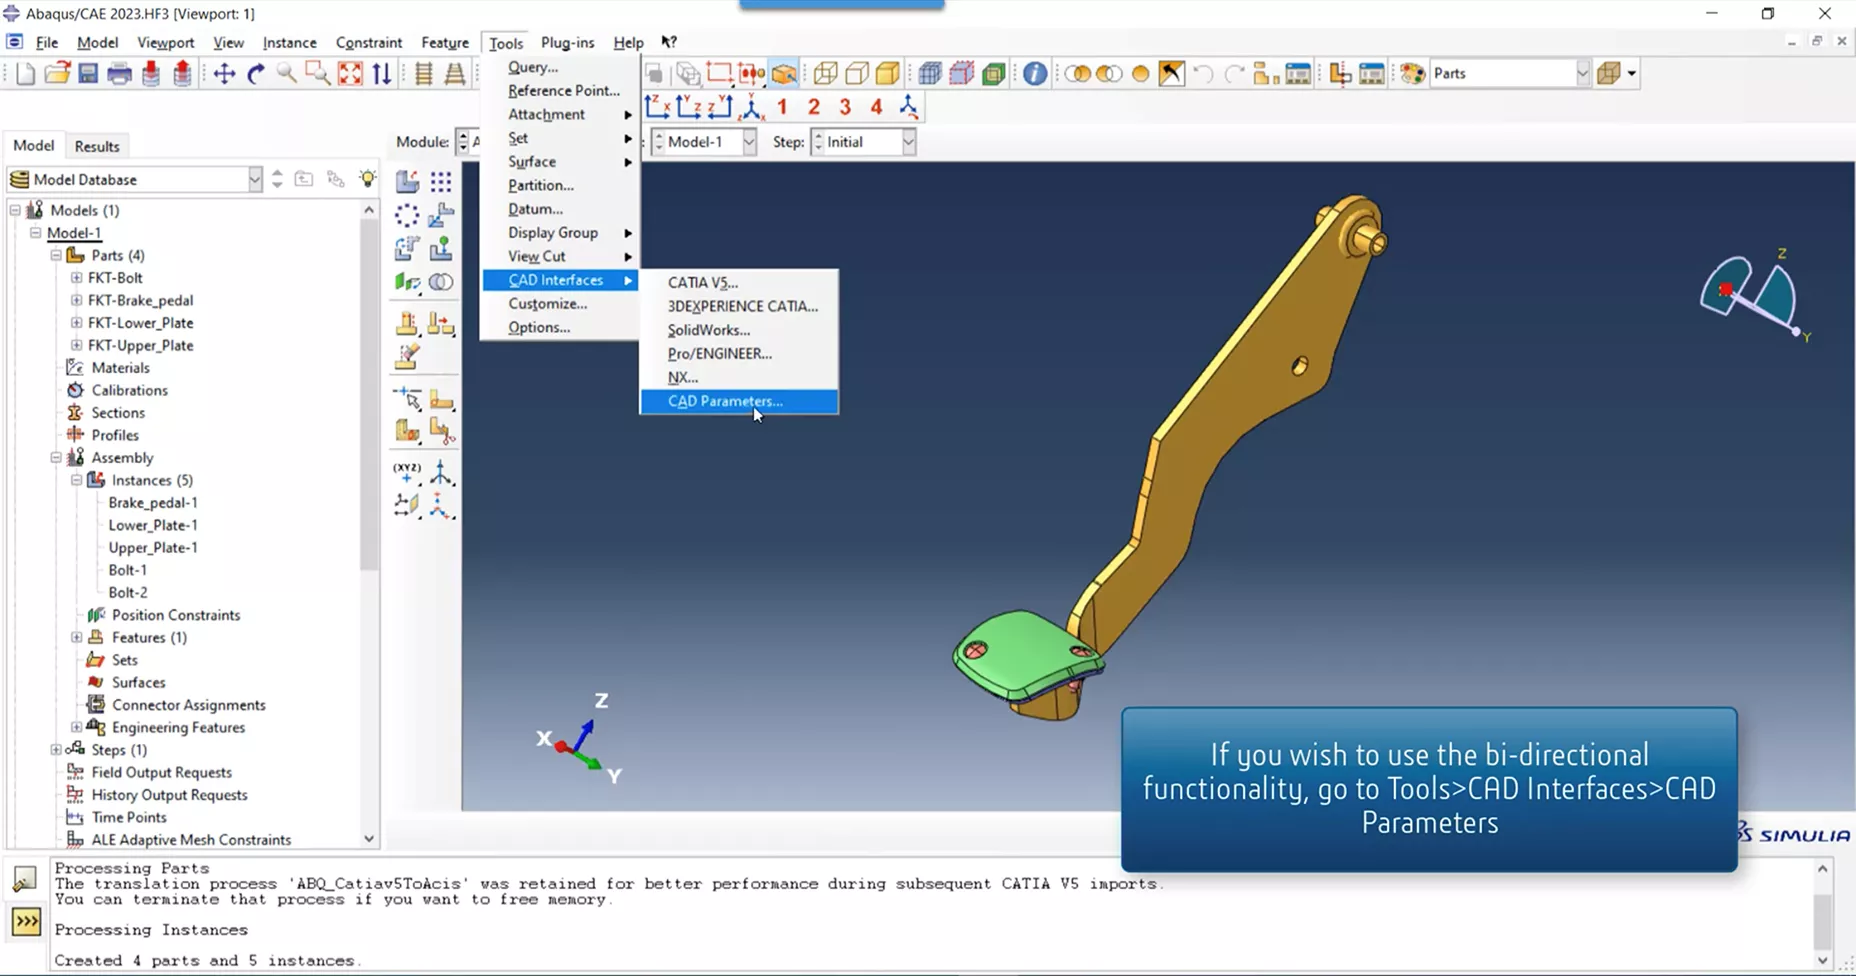 A user accesses CAD parameters from within Abaqus/CAE